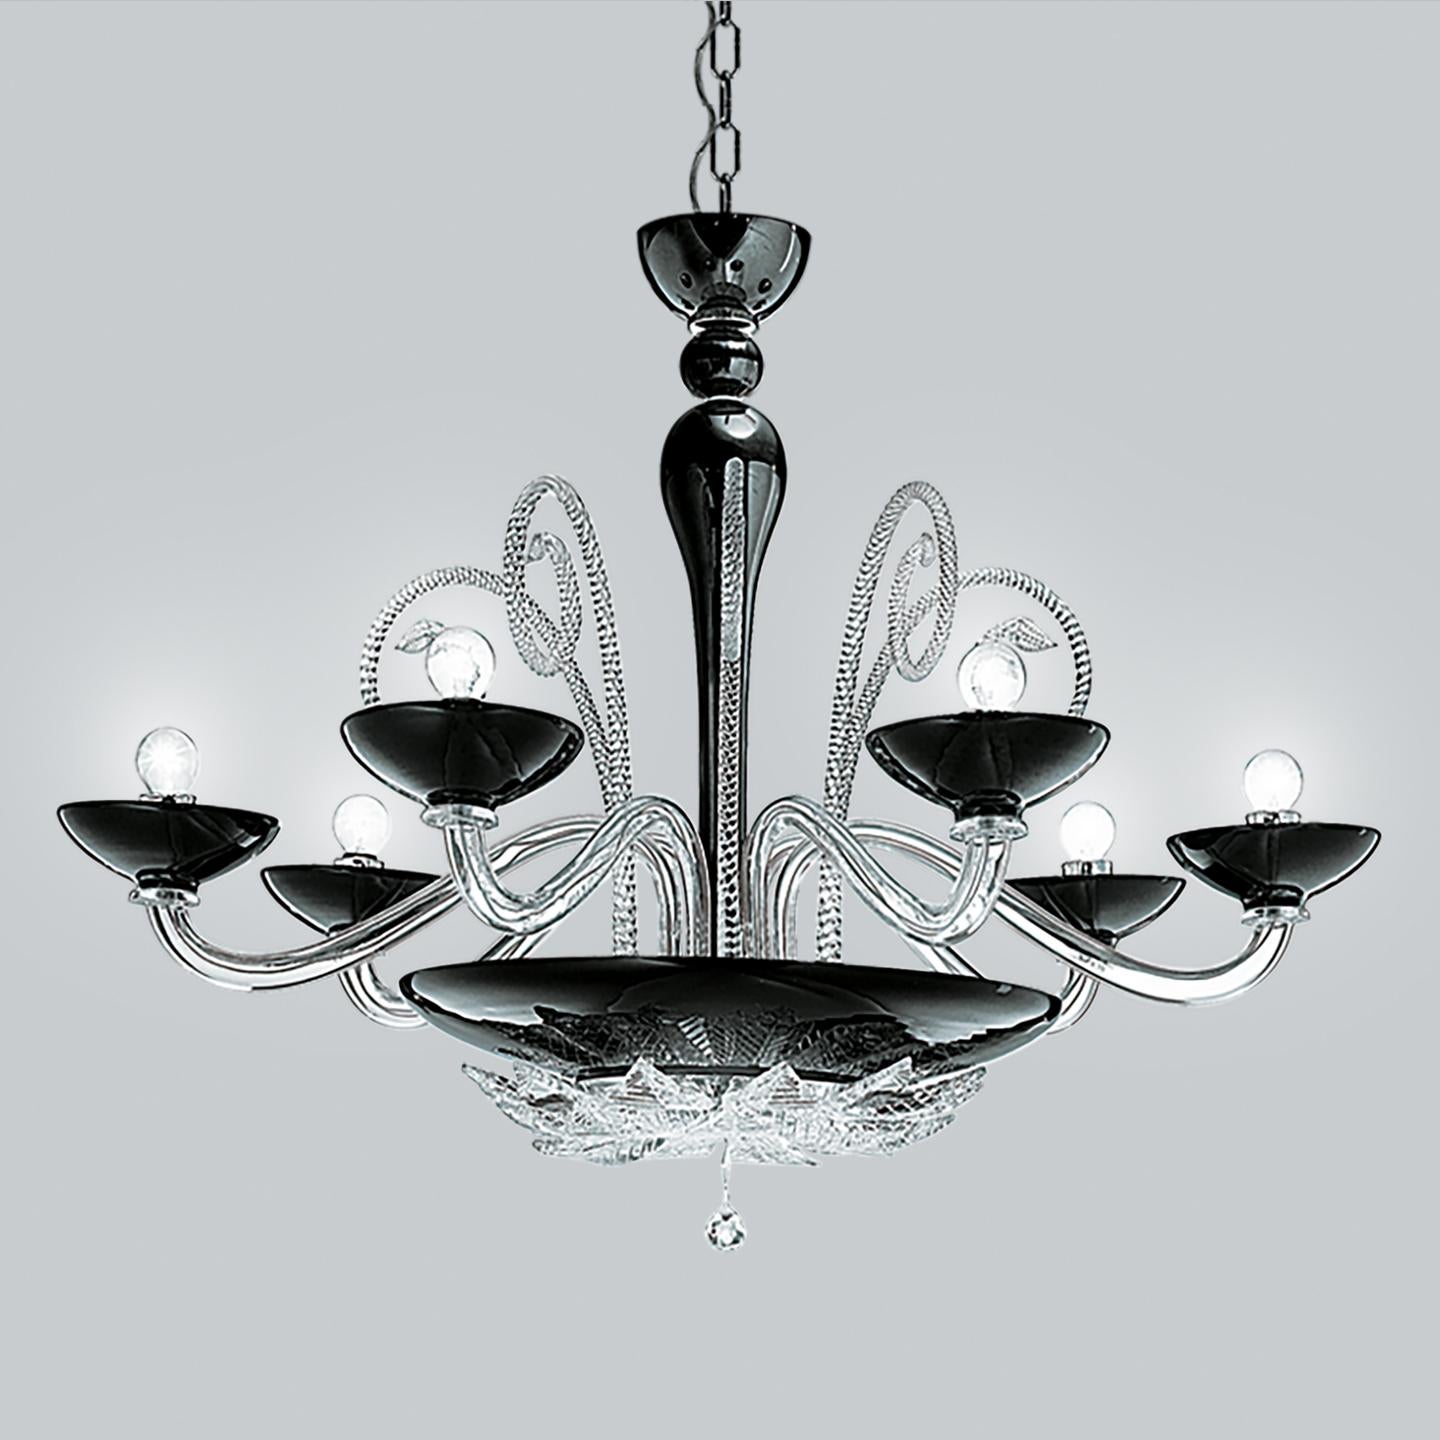 Marina Toscano designed Orleans (2006-2007) to use traditional hand blown Murano glass techniques and update them to a contemporary, transitional mood. It is a masterpiece of craftsmanship, as each piece is handmade by a maestro in the Veneto region